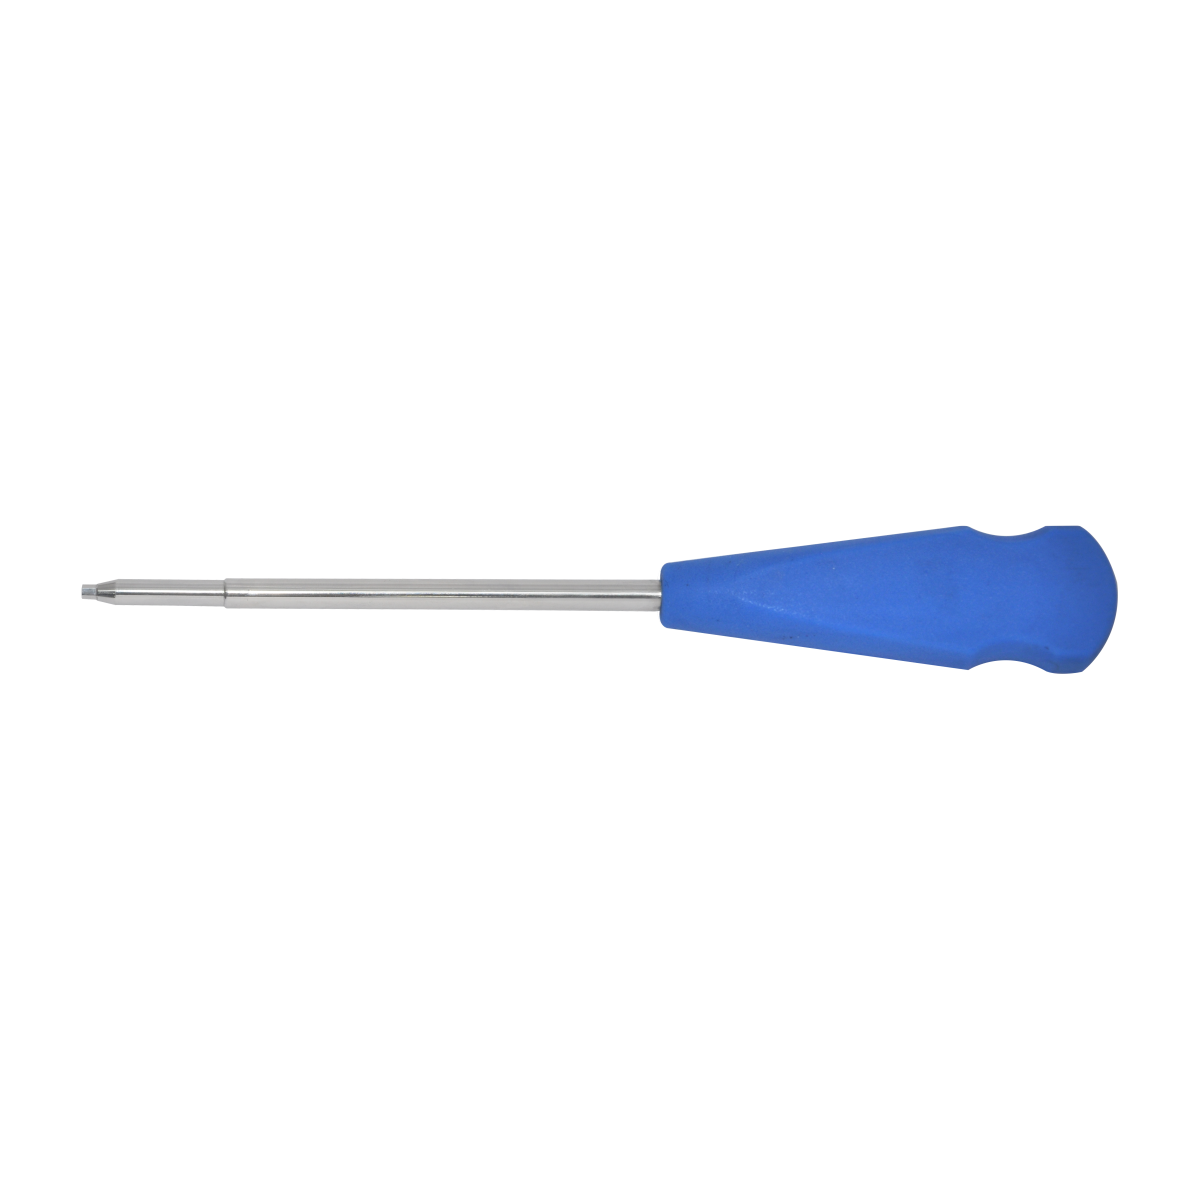 Hexagonal-Screw-Driver-2.5mm-Tip-Silicon-Handle.png